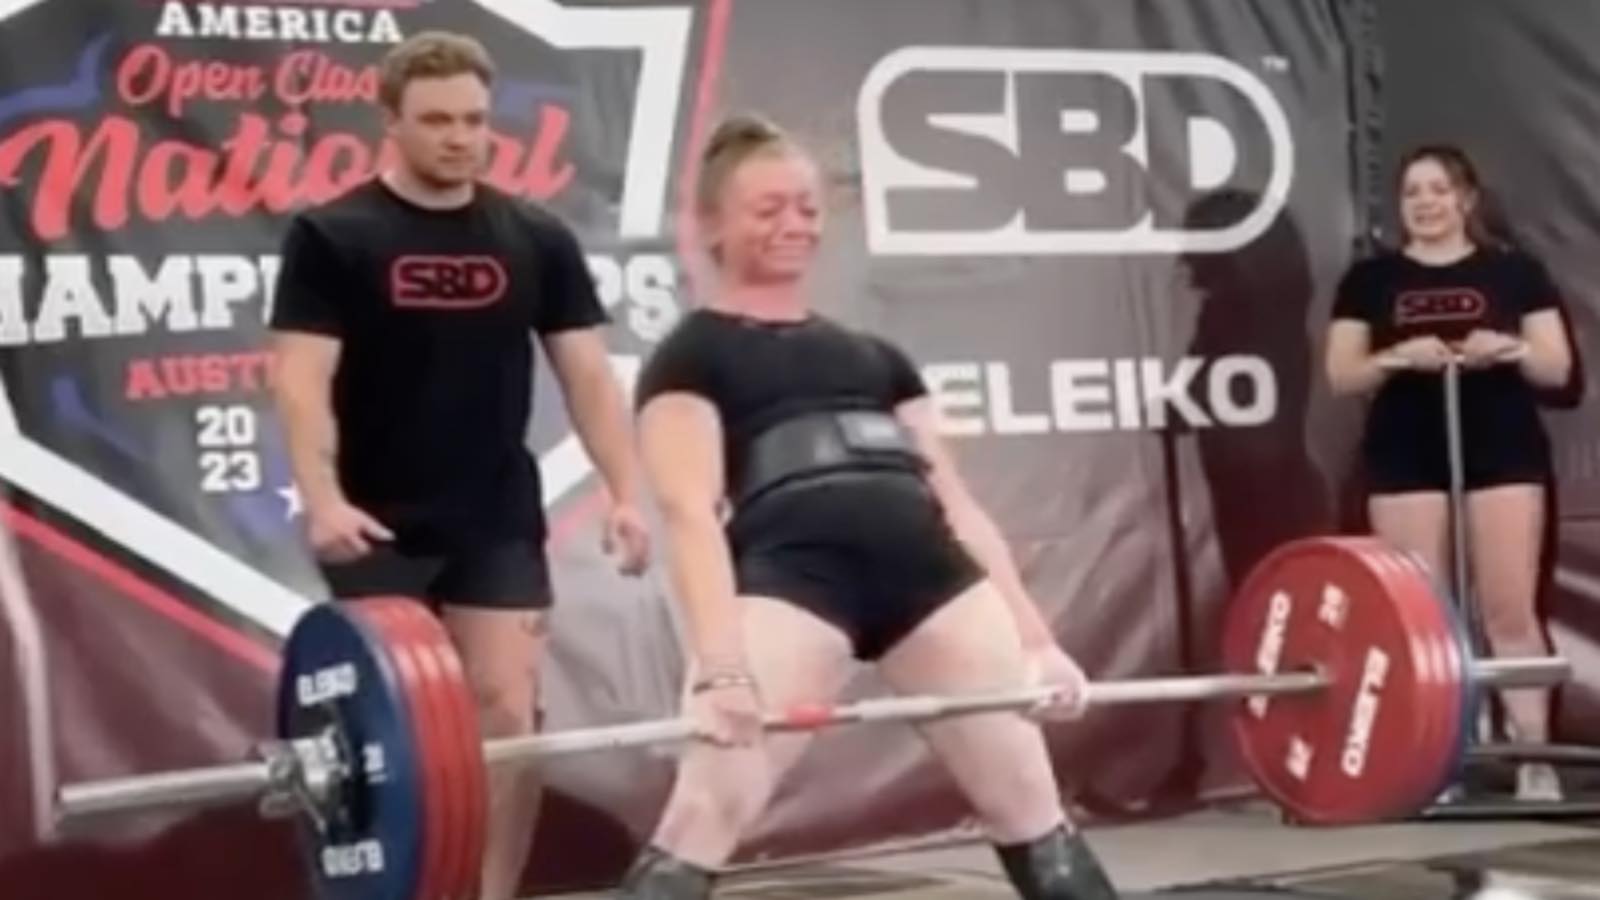 powerlifter-natalie-richards-totals-over-500-kilograms-weighing-57kg-at-powerlifting-america-nationals-–-breaking-muscle